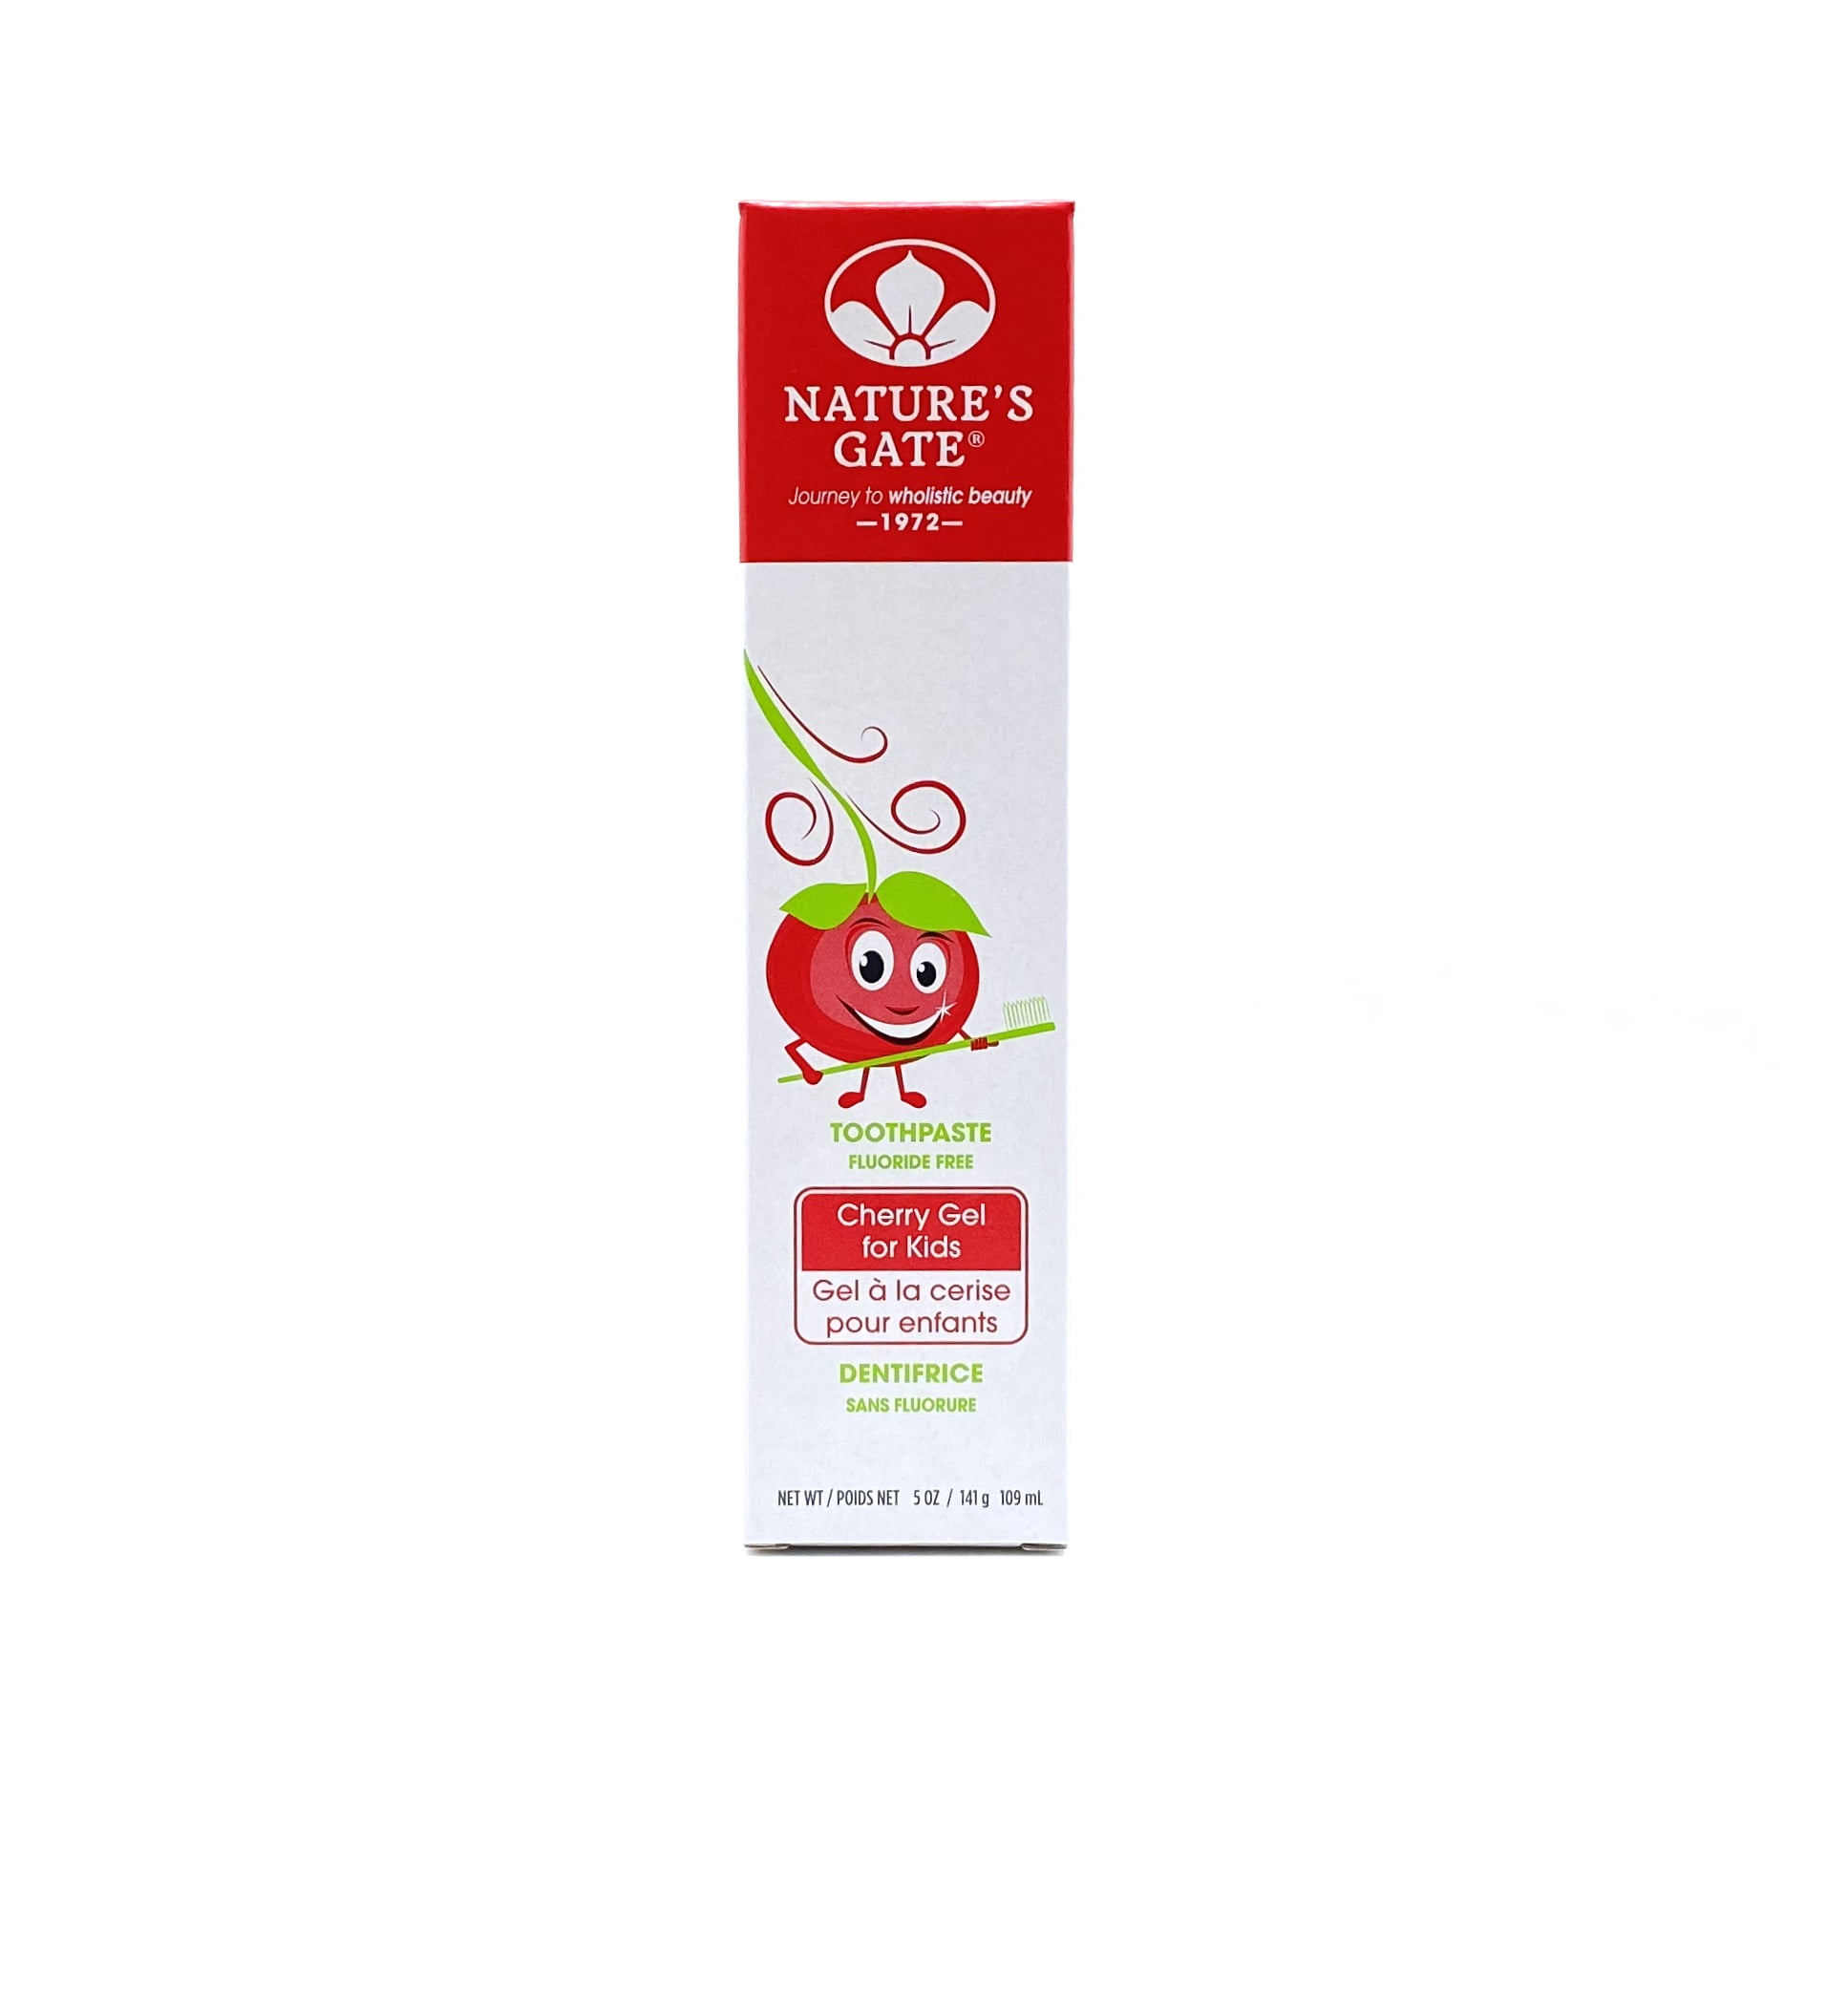 Natures Gate Toothpaste Gel, 5 Ounce - Cherry for Kids - Walmart.com